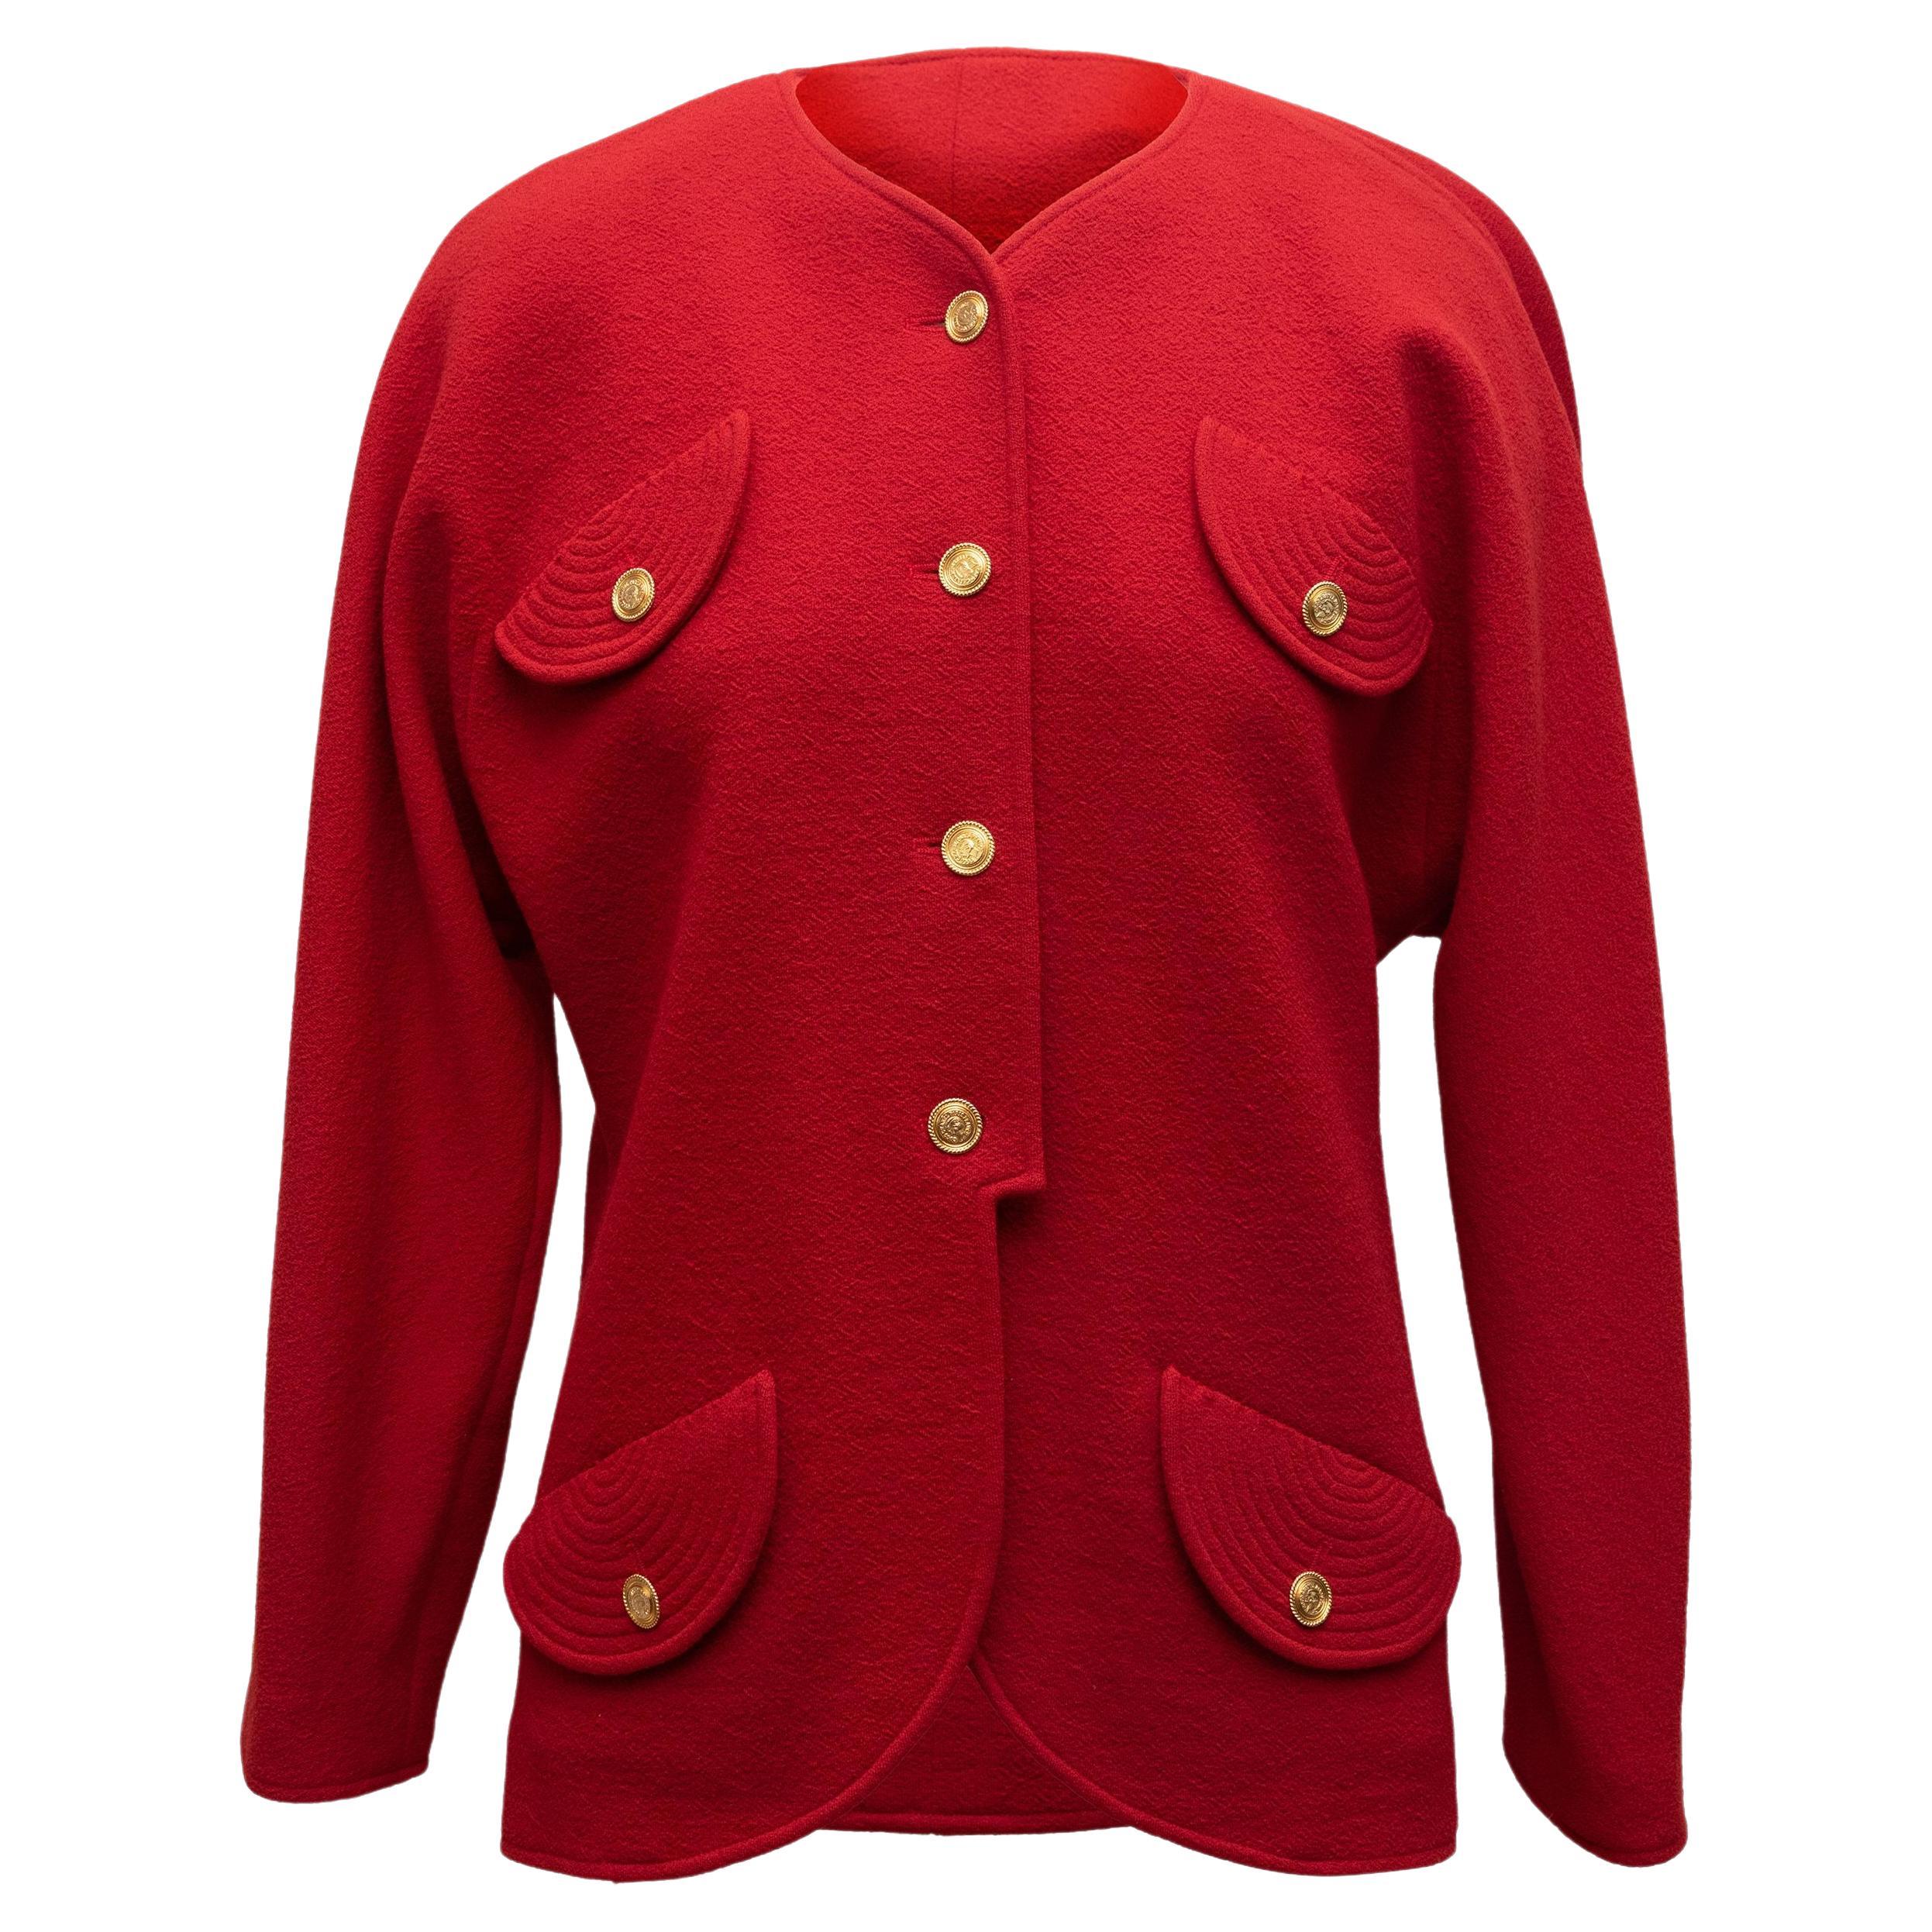 Chanel Red Boutique Wool Jacket